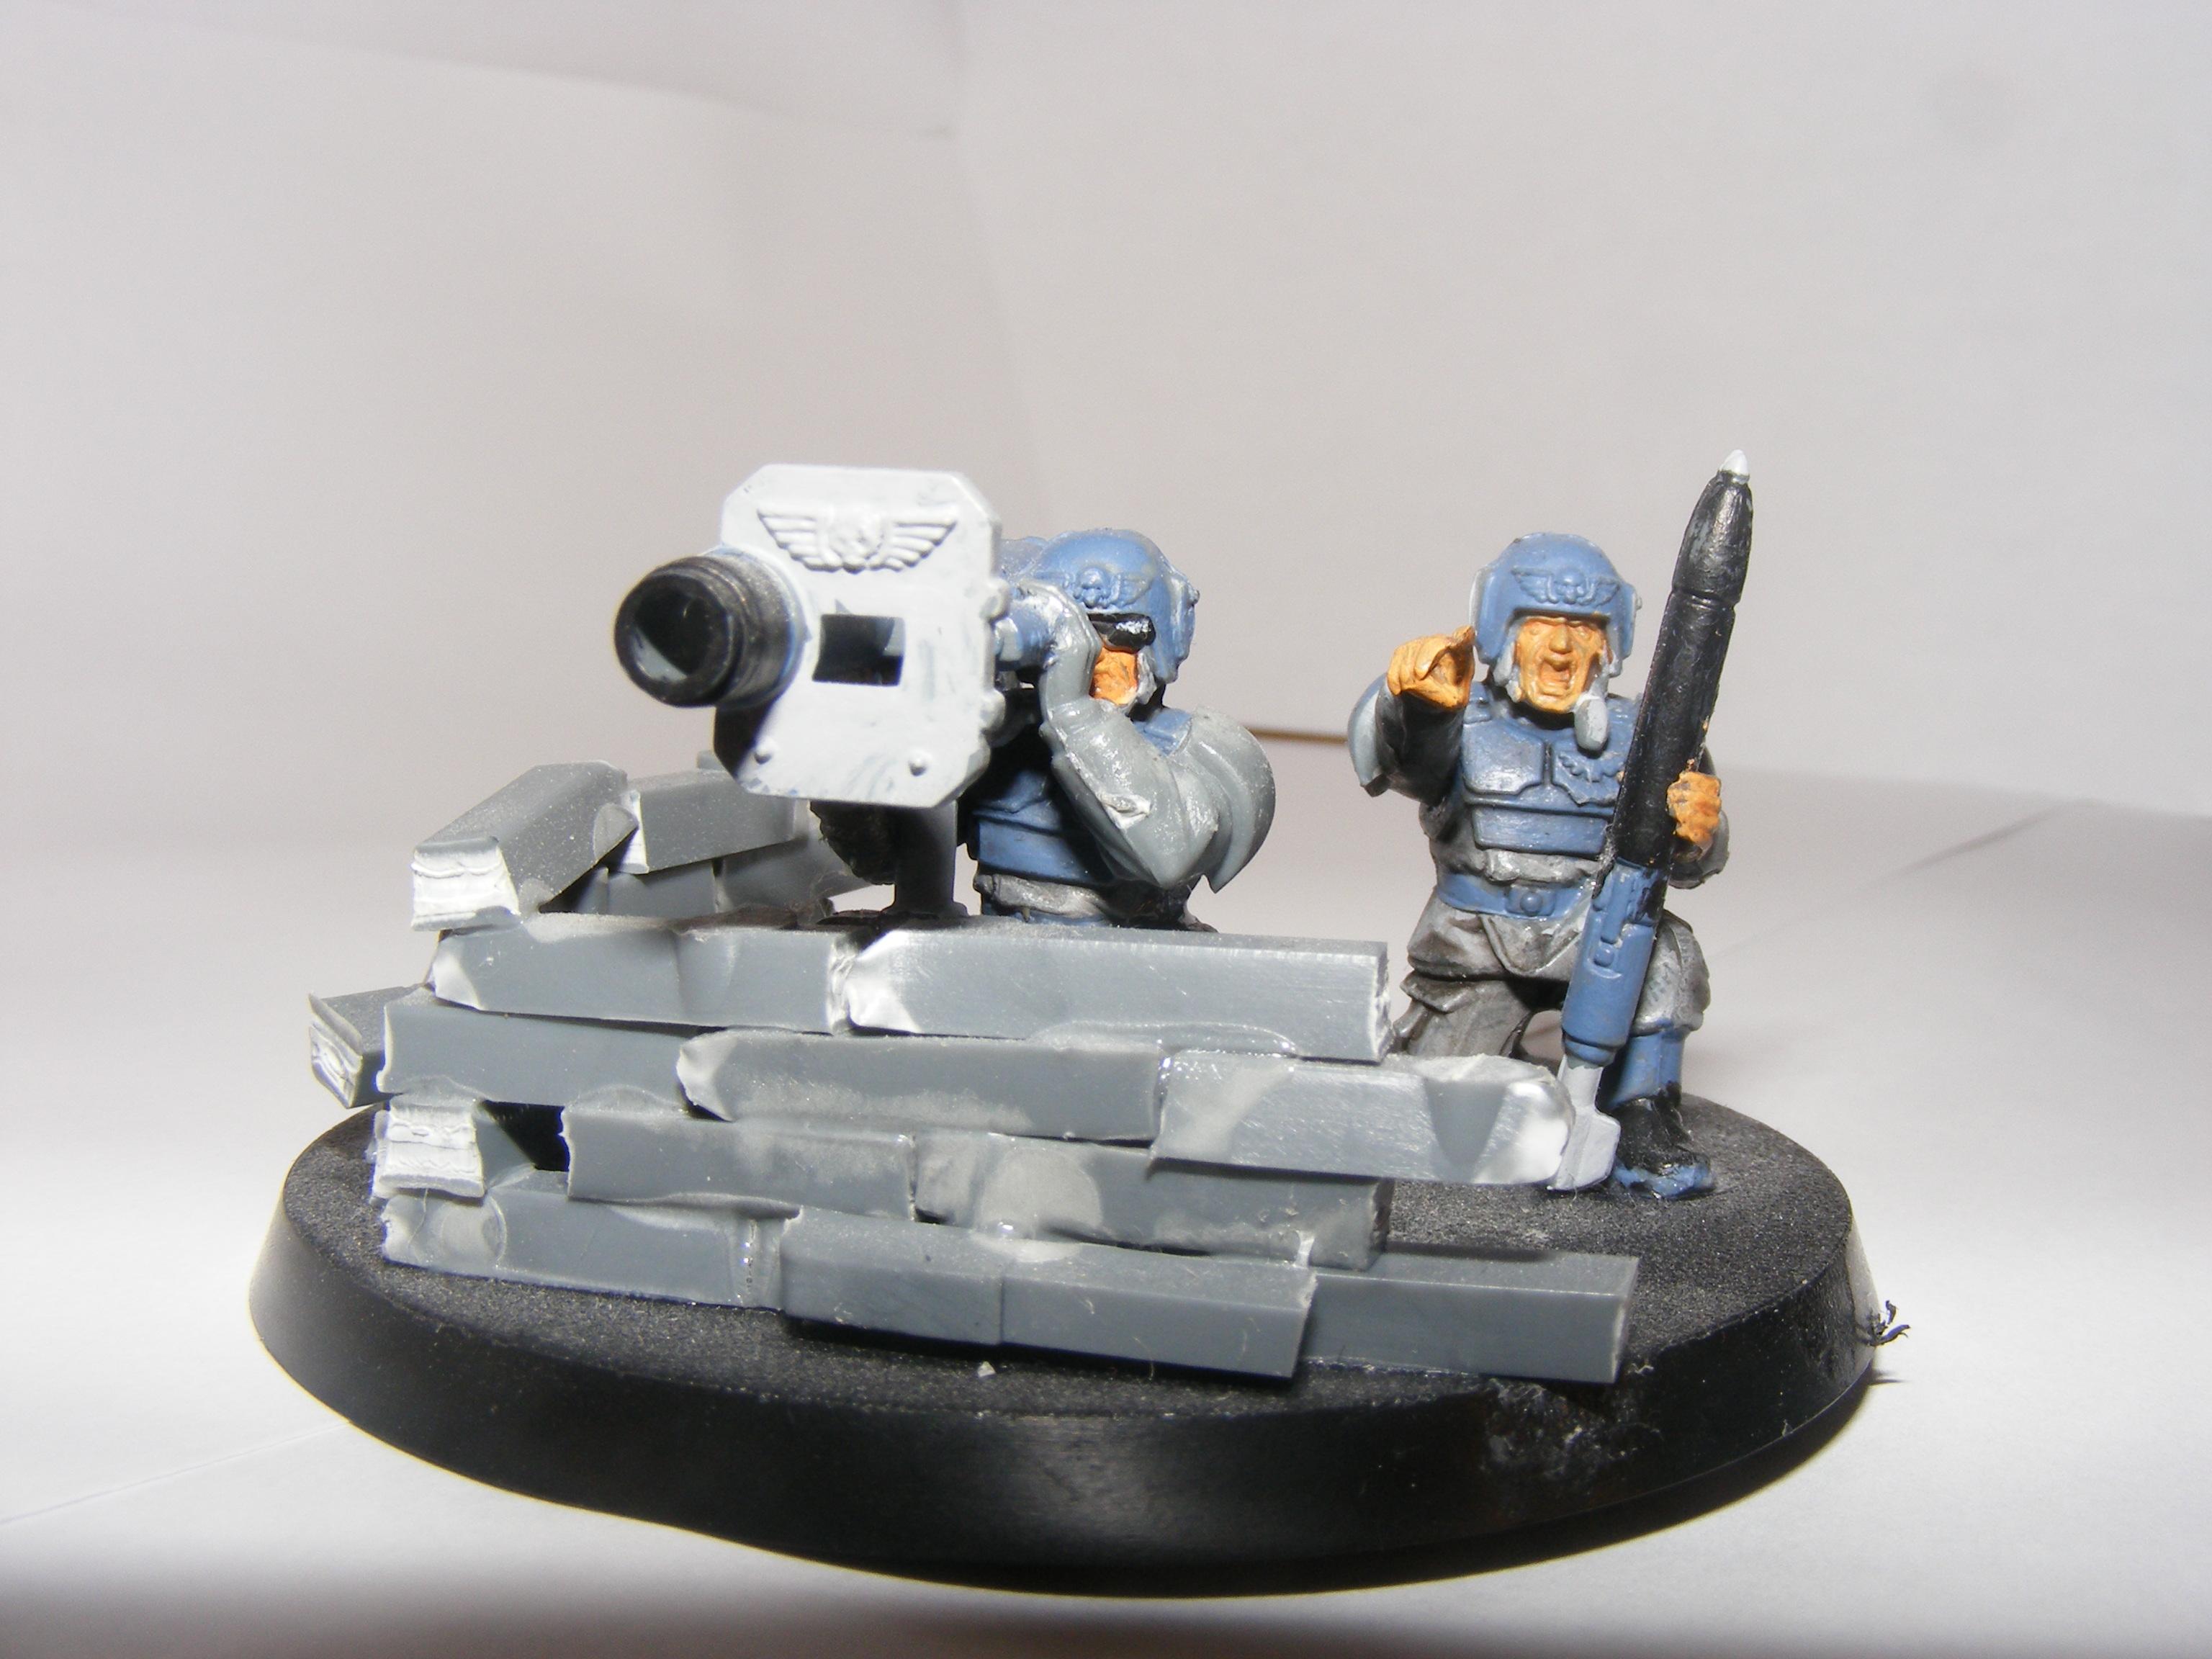 Cadians, Guard, Imperial Guard, Missile Launcher, Police, Project, Warhammer 40,000, Work In Progress